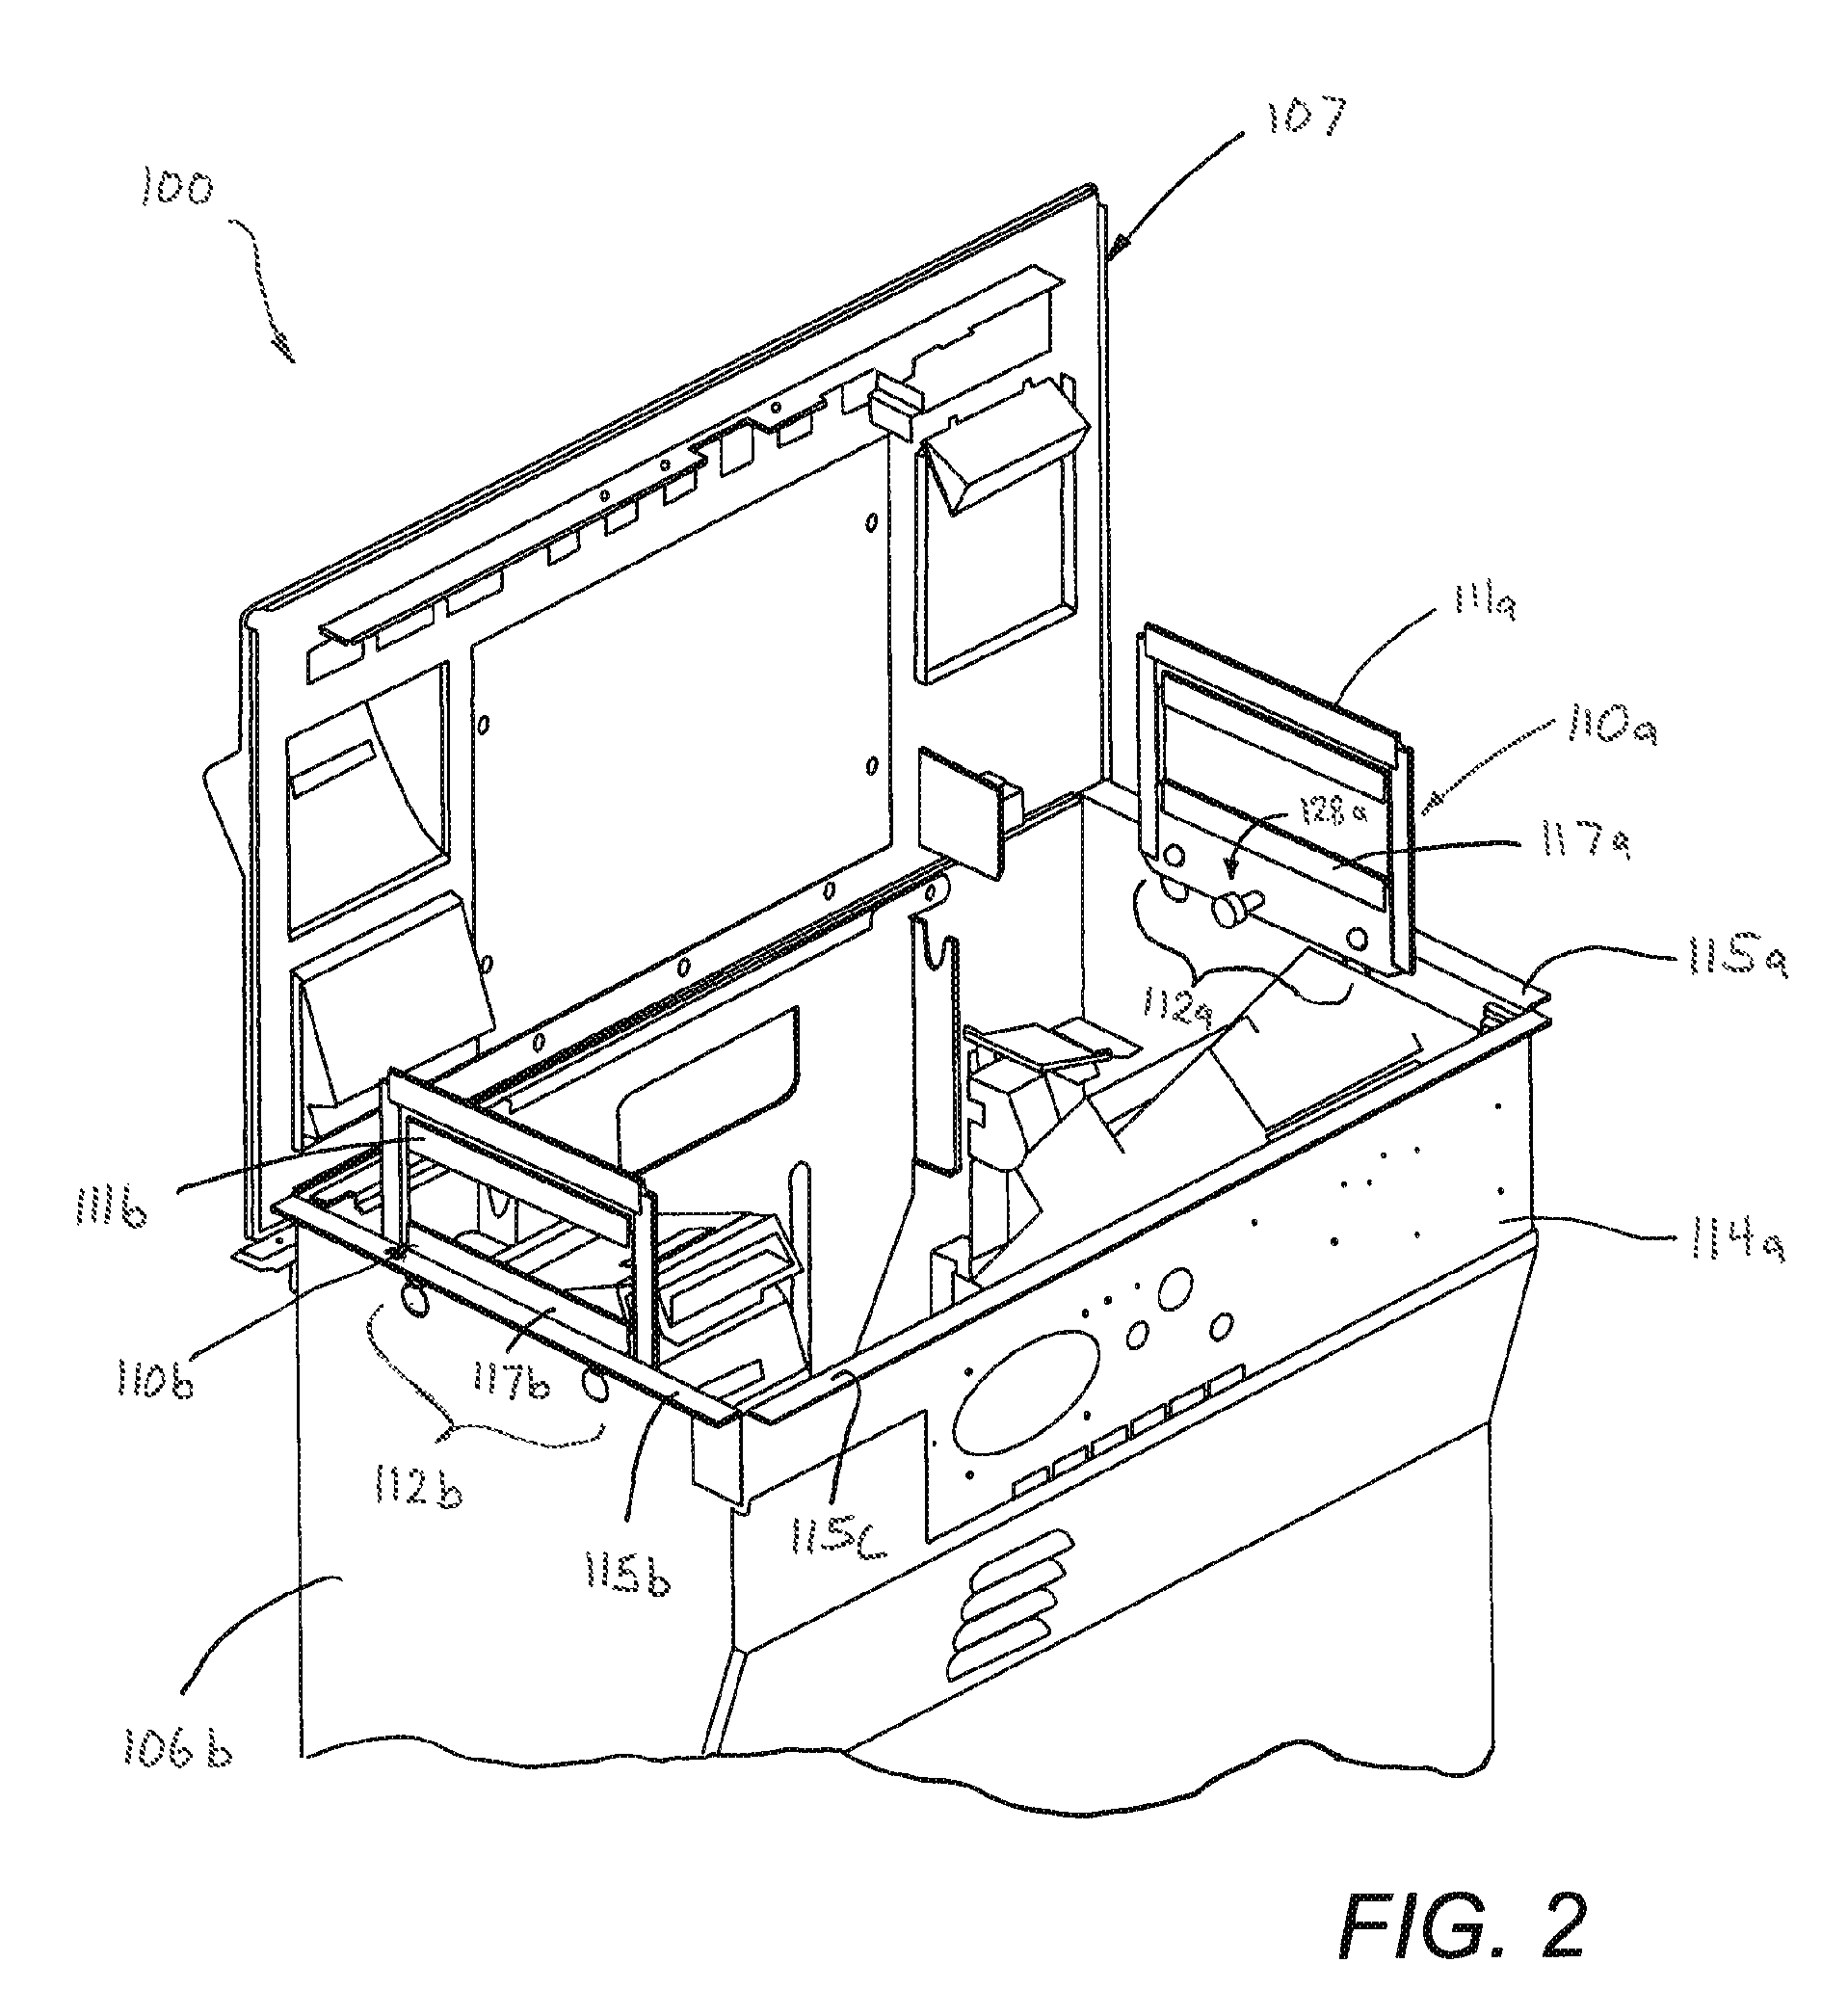 Repositionable handle assemblies for drop-in-bar gaming machines